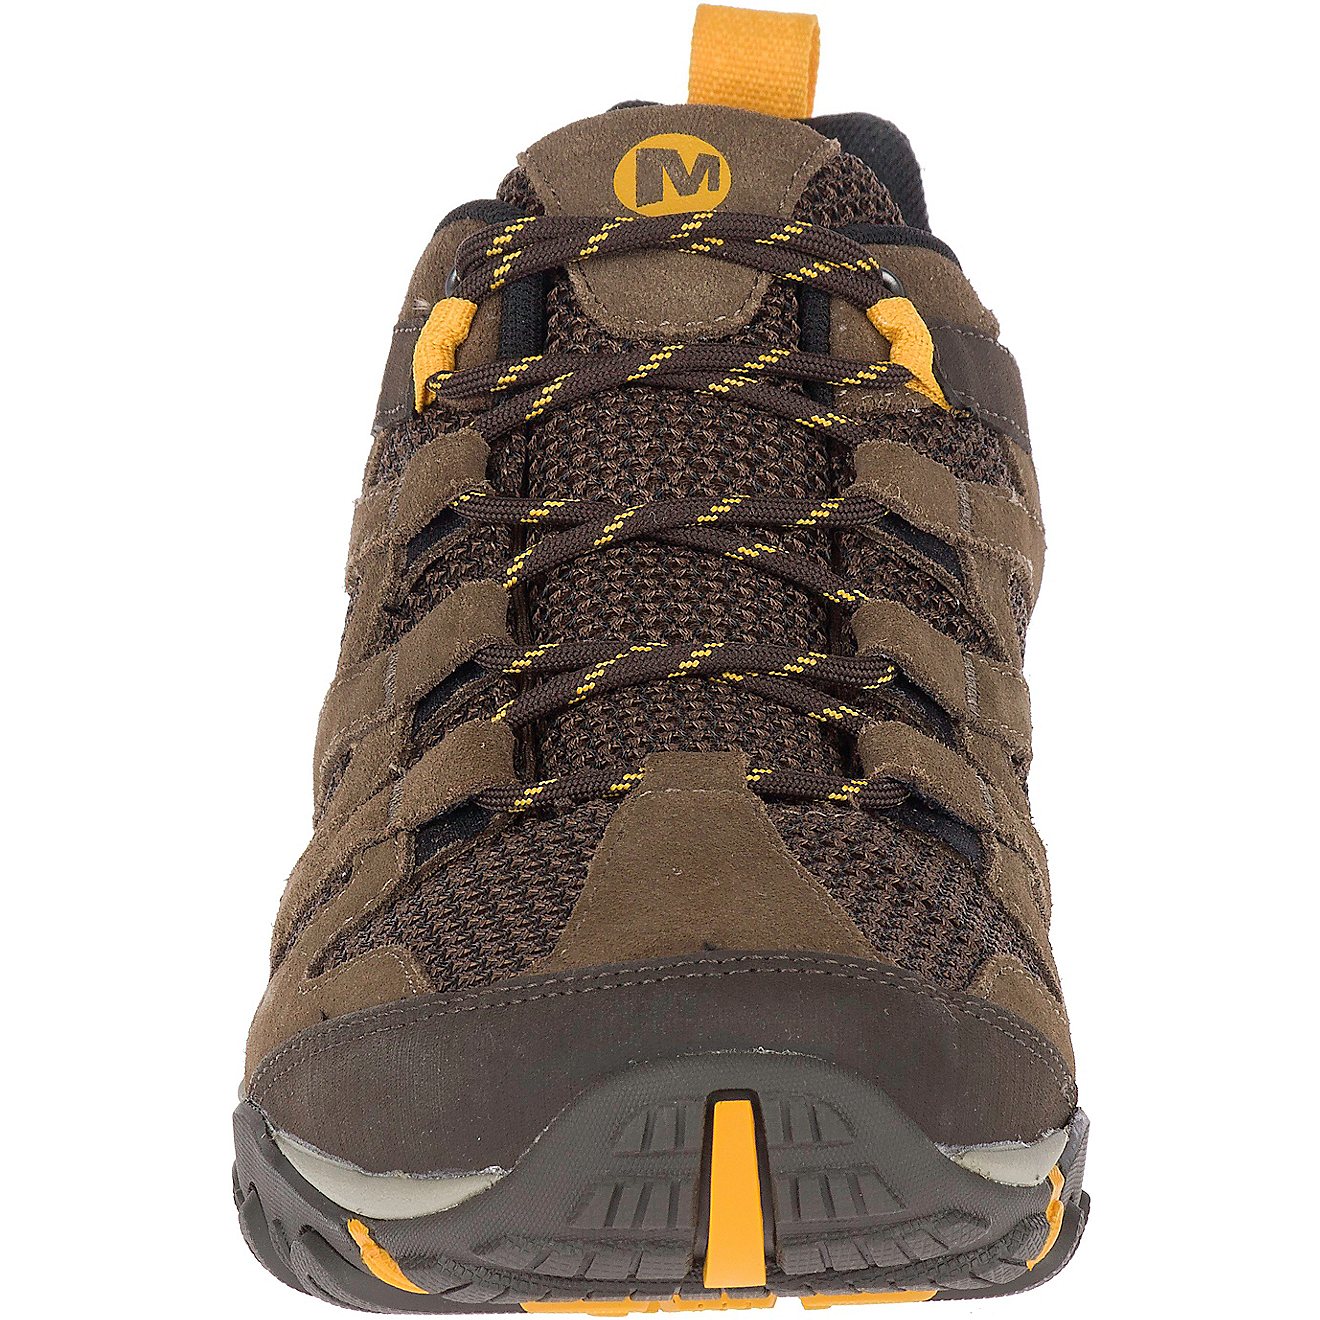 Merrell Men's Alverstone Hiking Shoes | Free Shipping at Academy